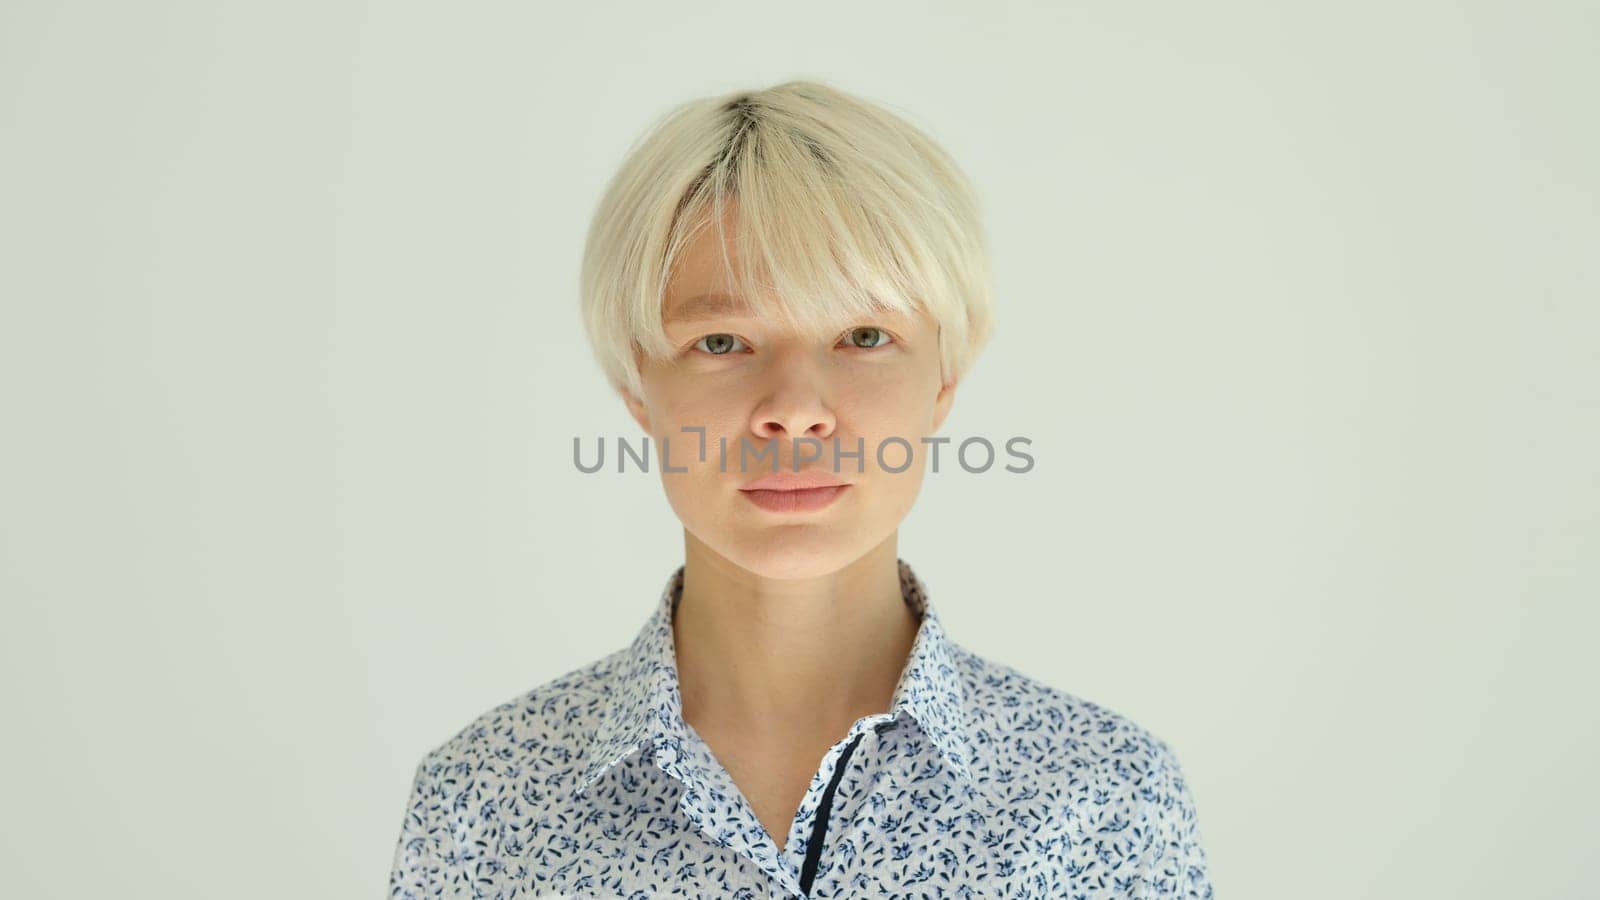 Portrait of blonde woman with short hair on white background. Stylish hairstyle concept